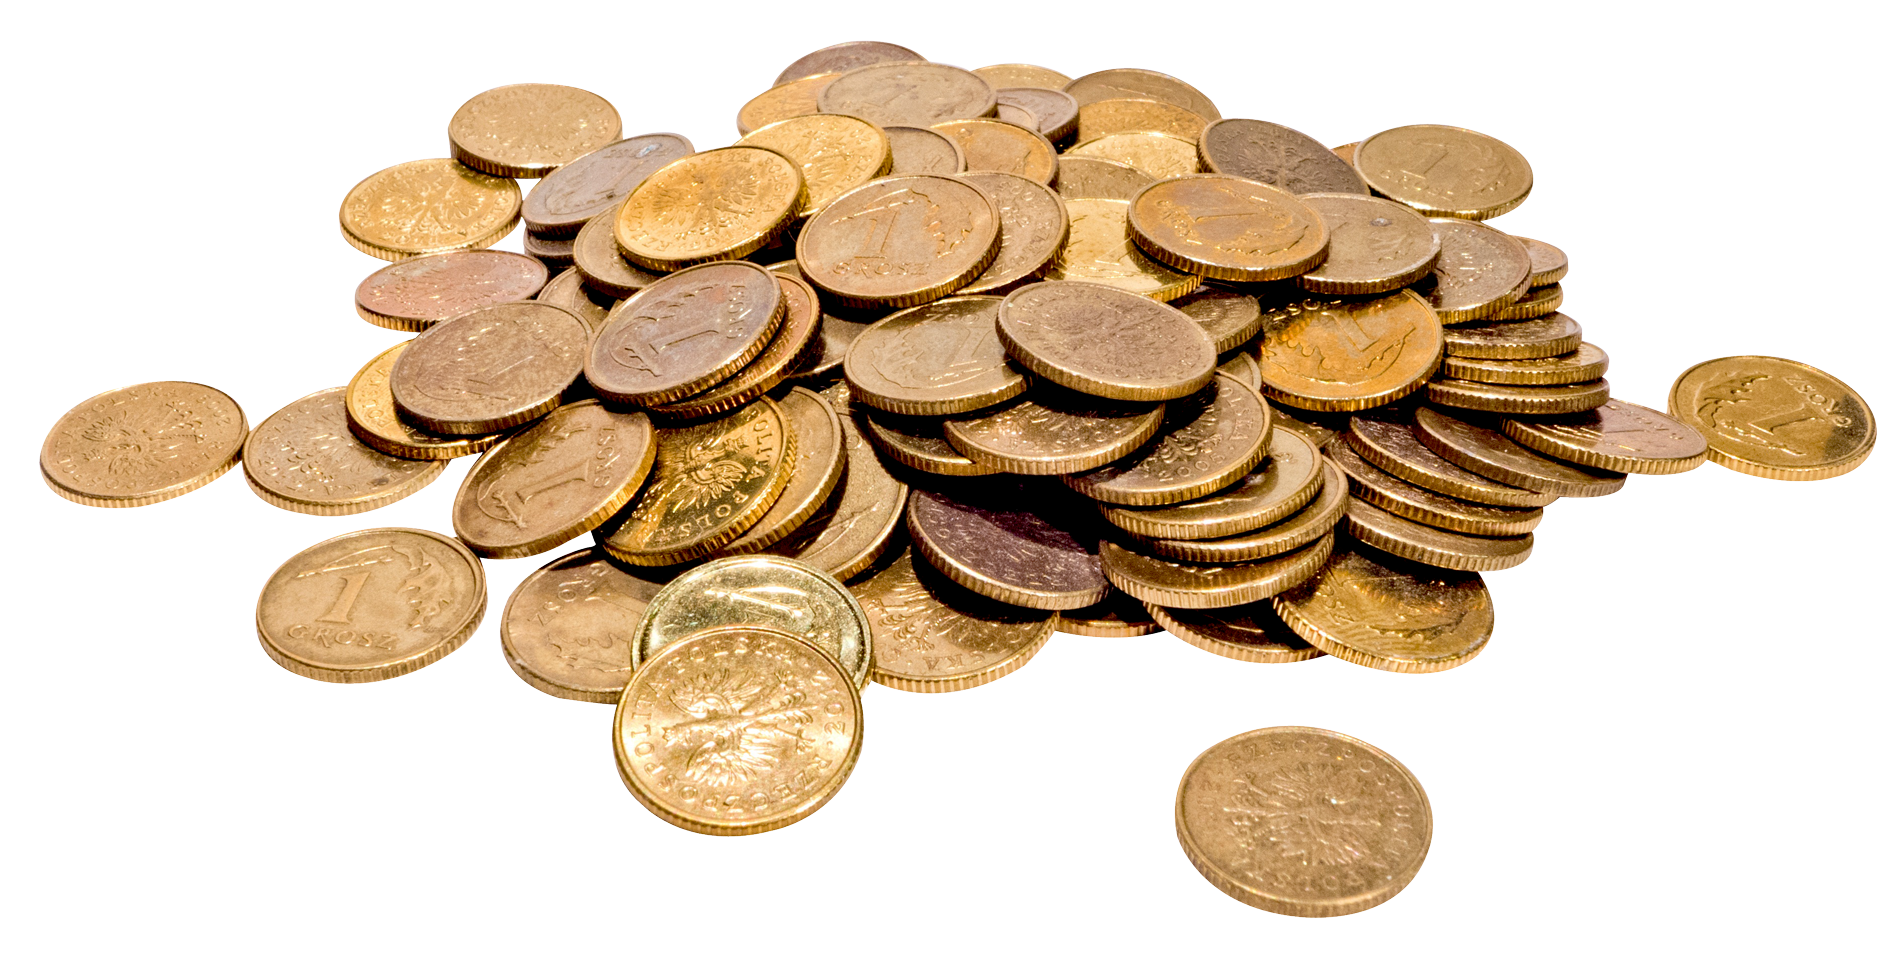 Money Coins PNG Image - PurePNG | Free transparent CC0 PNG Image Library